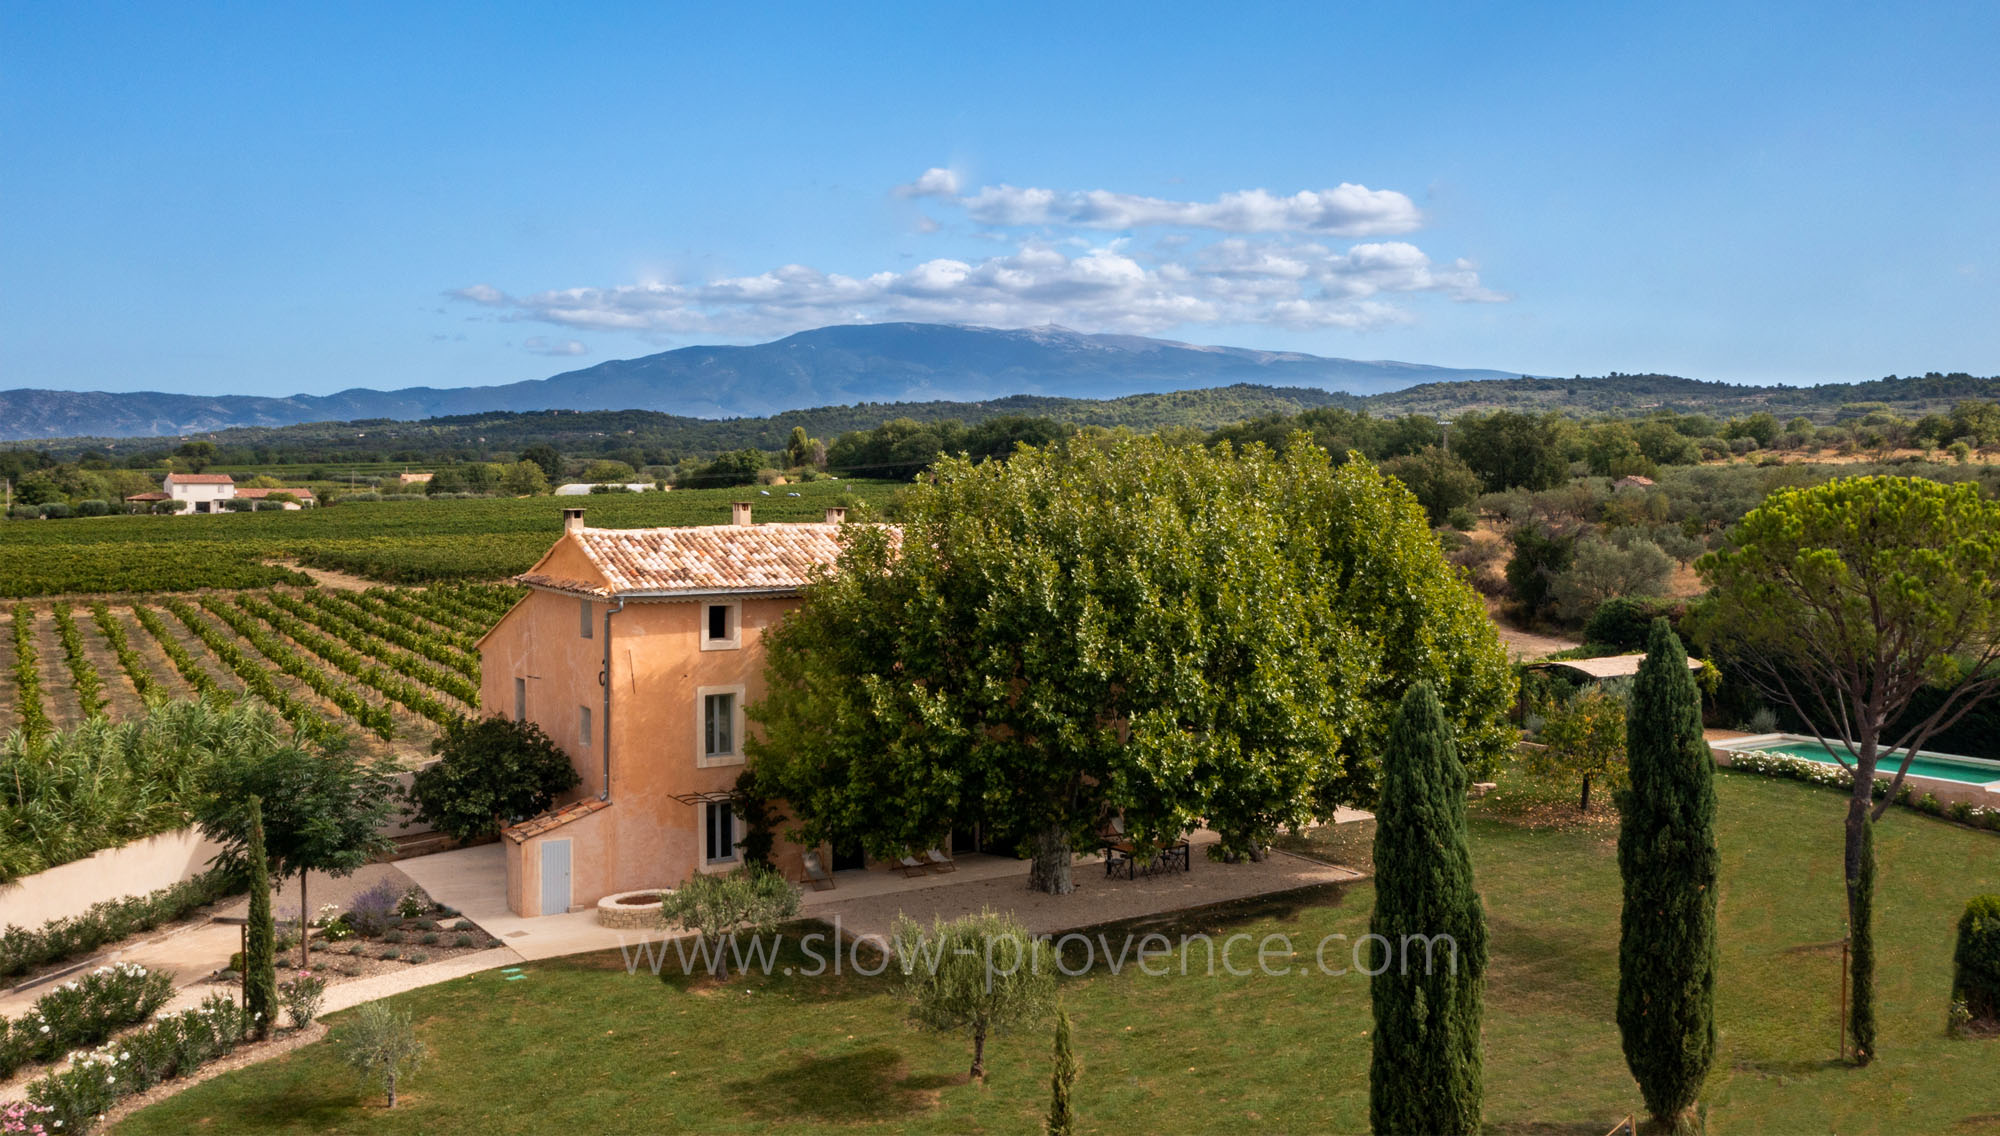 Large provencal farmhouse with view